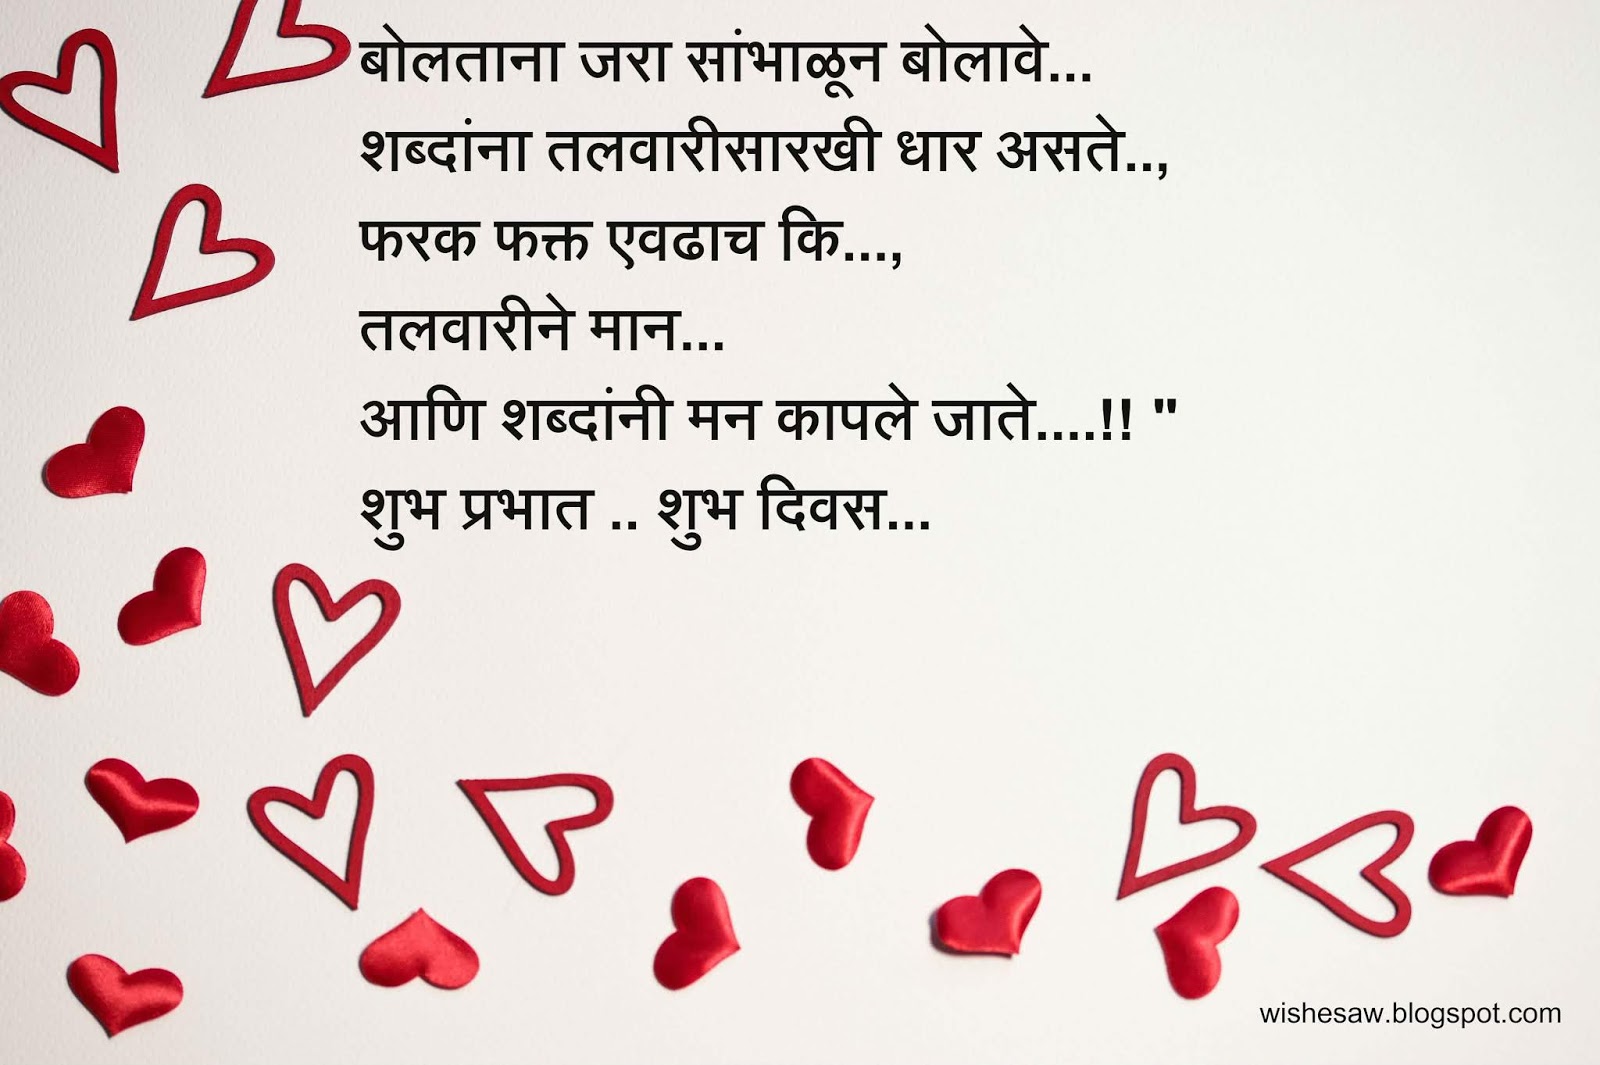 30 Good Morning Messages In Marathi With Images Free Download Sometimes it is tough to find the words, even if point out something you pass by, and tell your lover how it reminds you of a romantic time you consider sending a sweet text message, too. good morning messages in marathi with